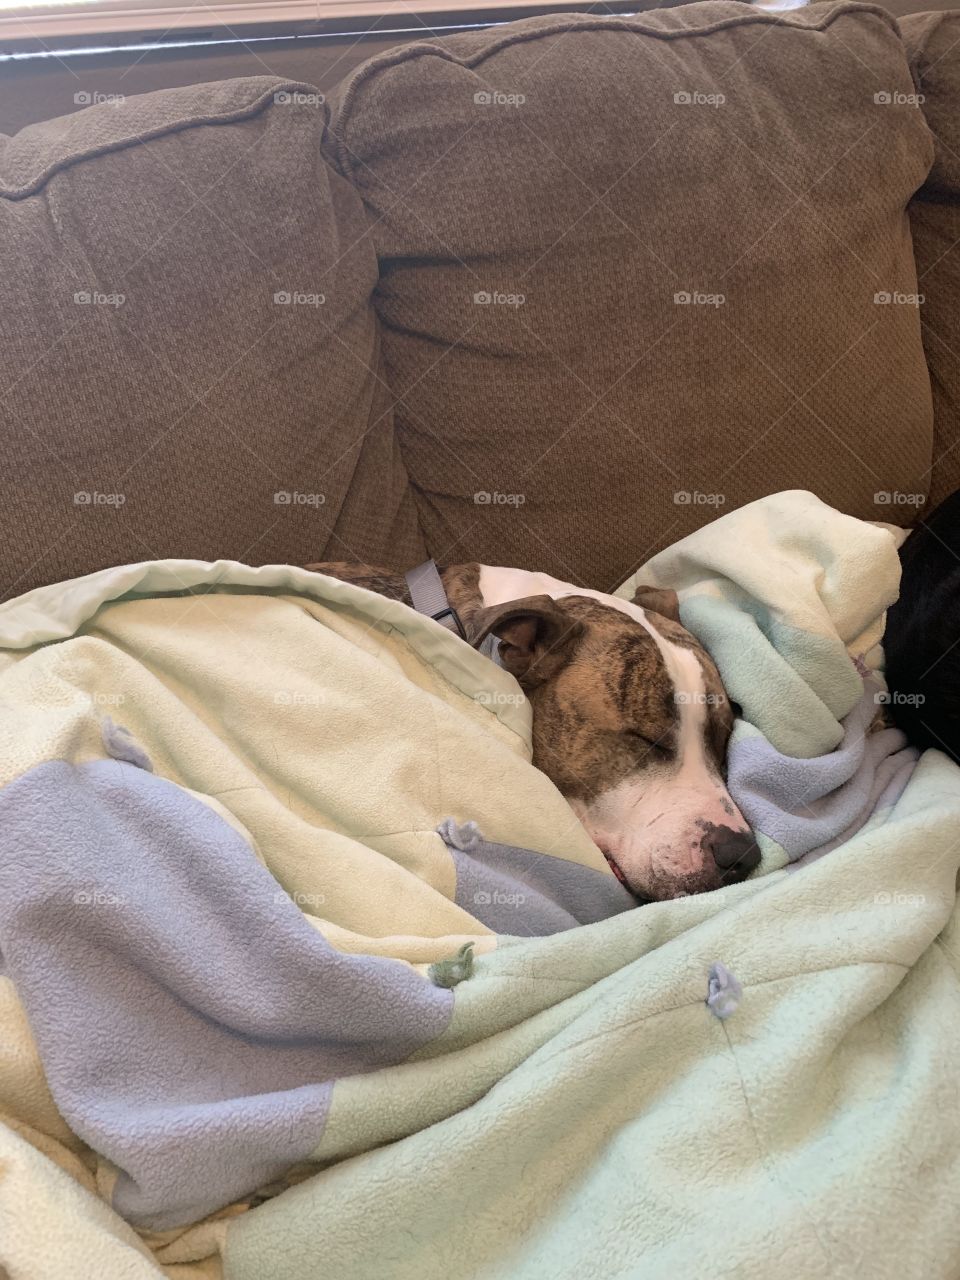 Brindle pit bull sleeping under a warm blanket. The dogs name is Pickles and he was a rescue from hurricane Harvey that was heart worm positive and had a staff infection. Our family decided to take him in and today he is heart worm and infection free